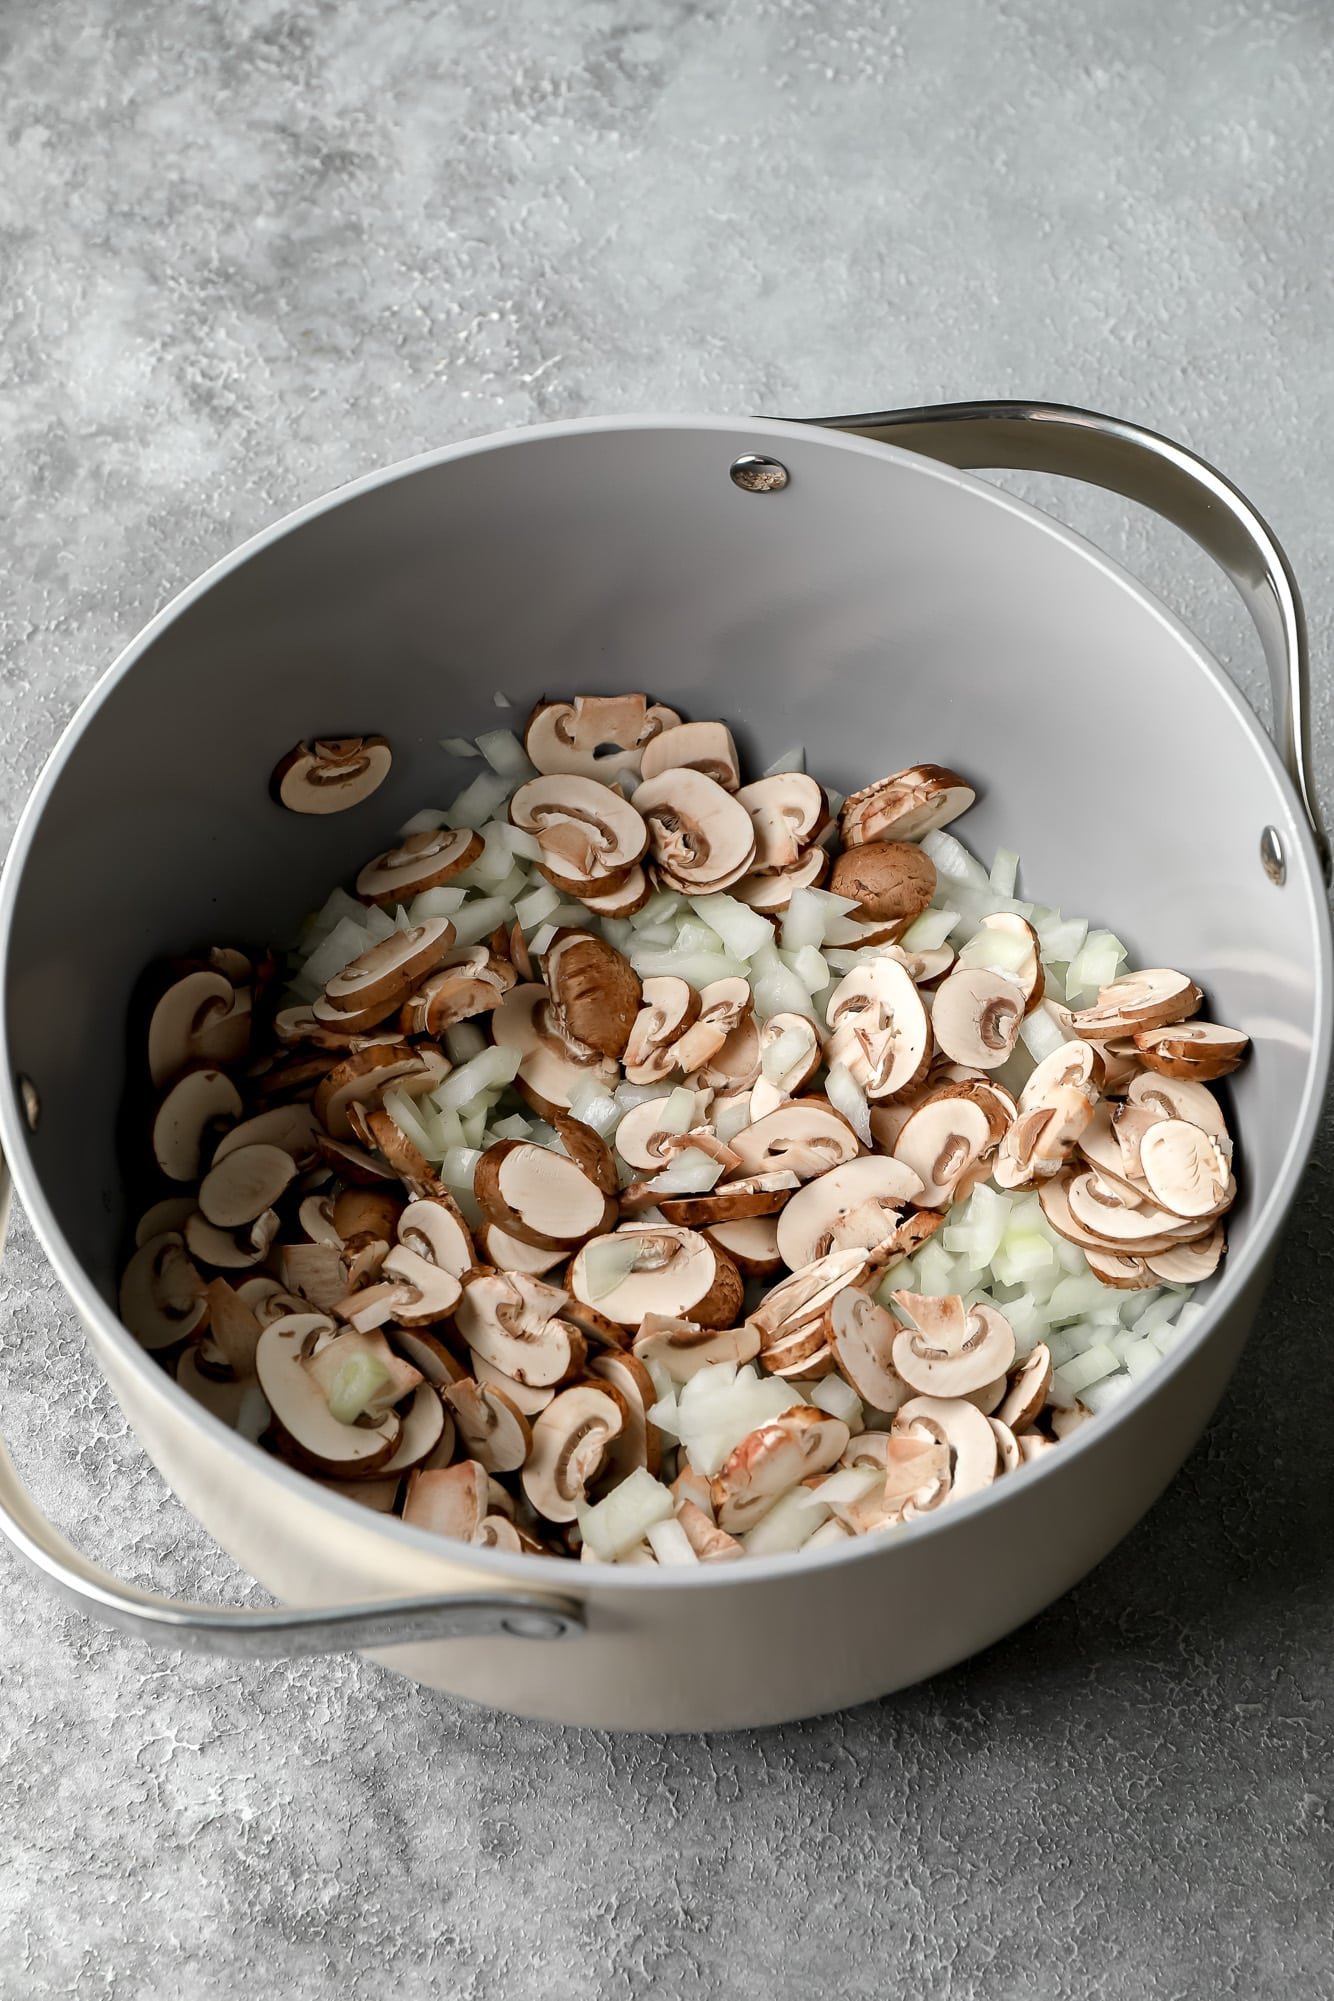 cooking sliced onions and mushrooms in a large grey pot.